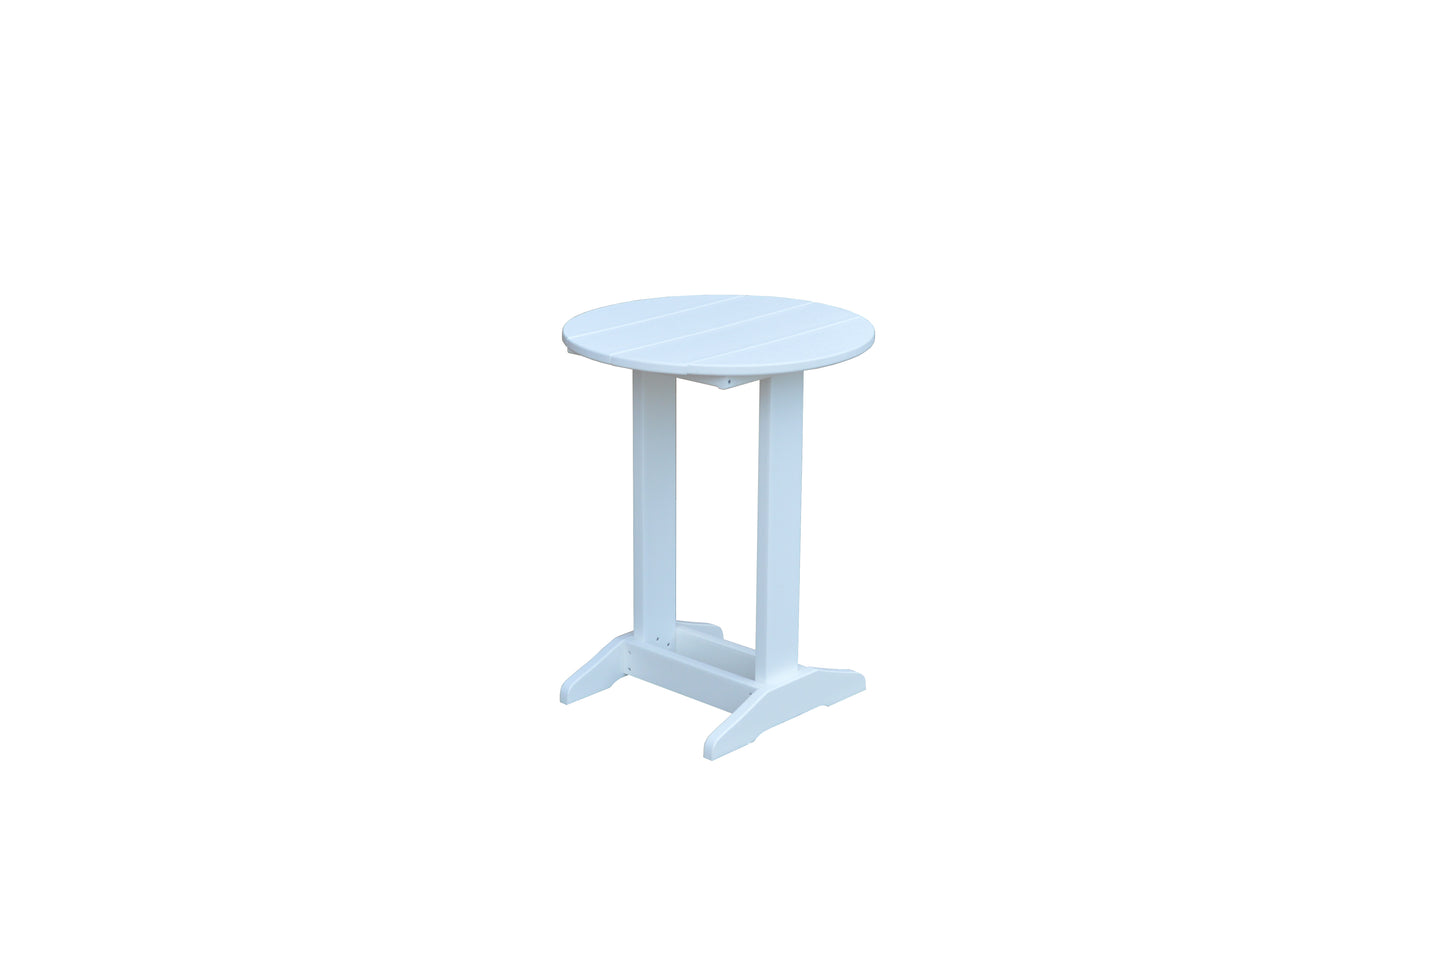 A&L Furniture Co. Recycled Plastic Round Balcony Side Table (PAIRS W/ COUNTER HEIGHT FURNITURE) - LEAD TIME TO SHIP 10 BUSINESS DAYS